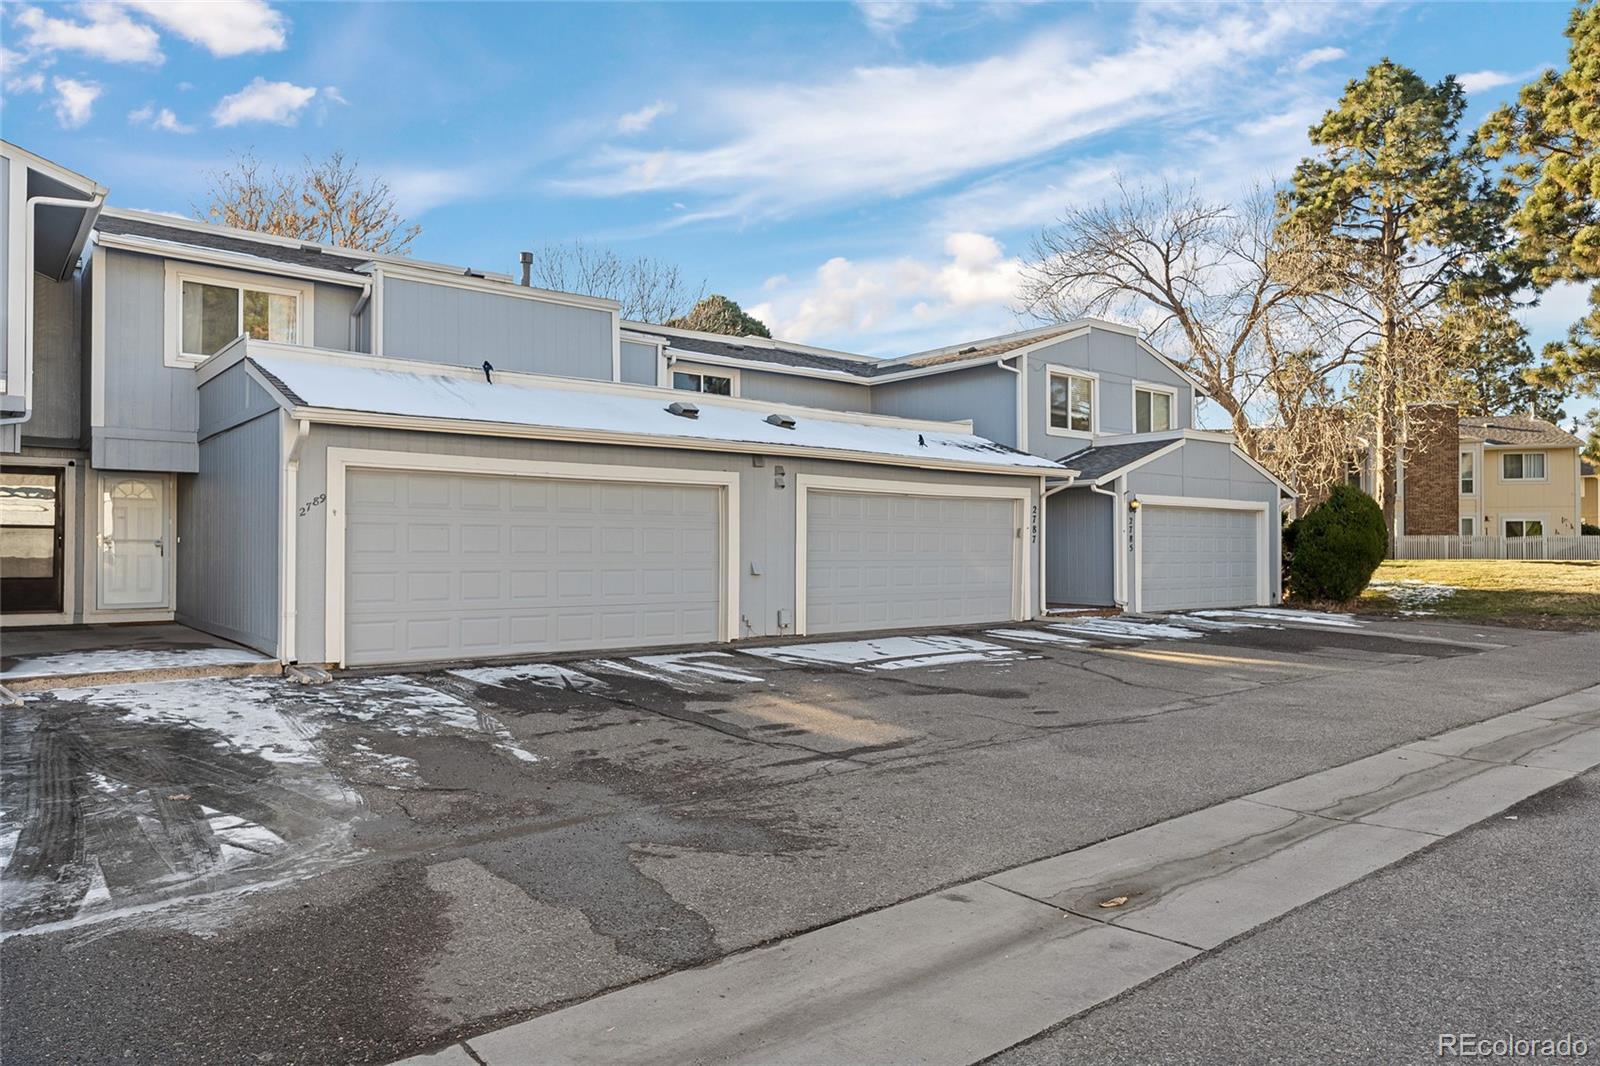 2789 s lansing way, aurora sold home. Closed on 2024-02-26 for $435,000.